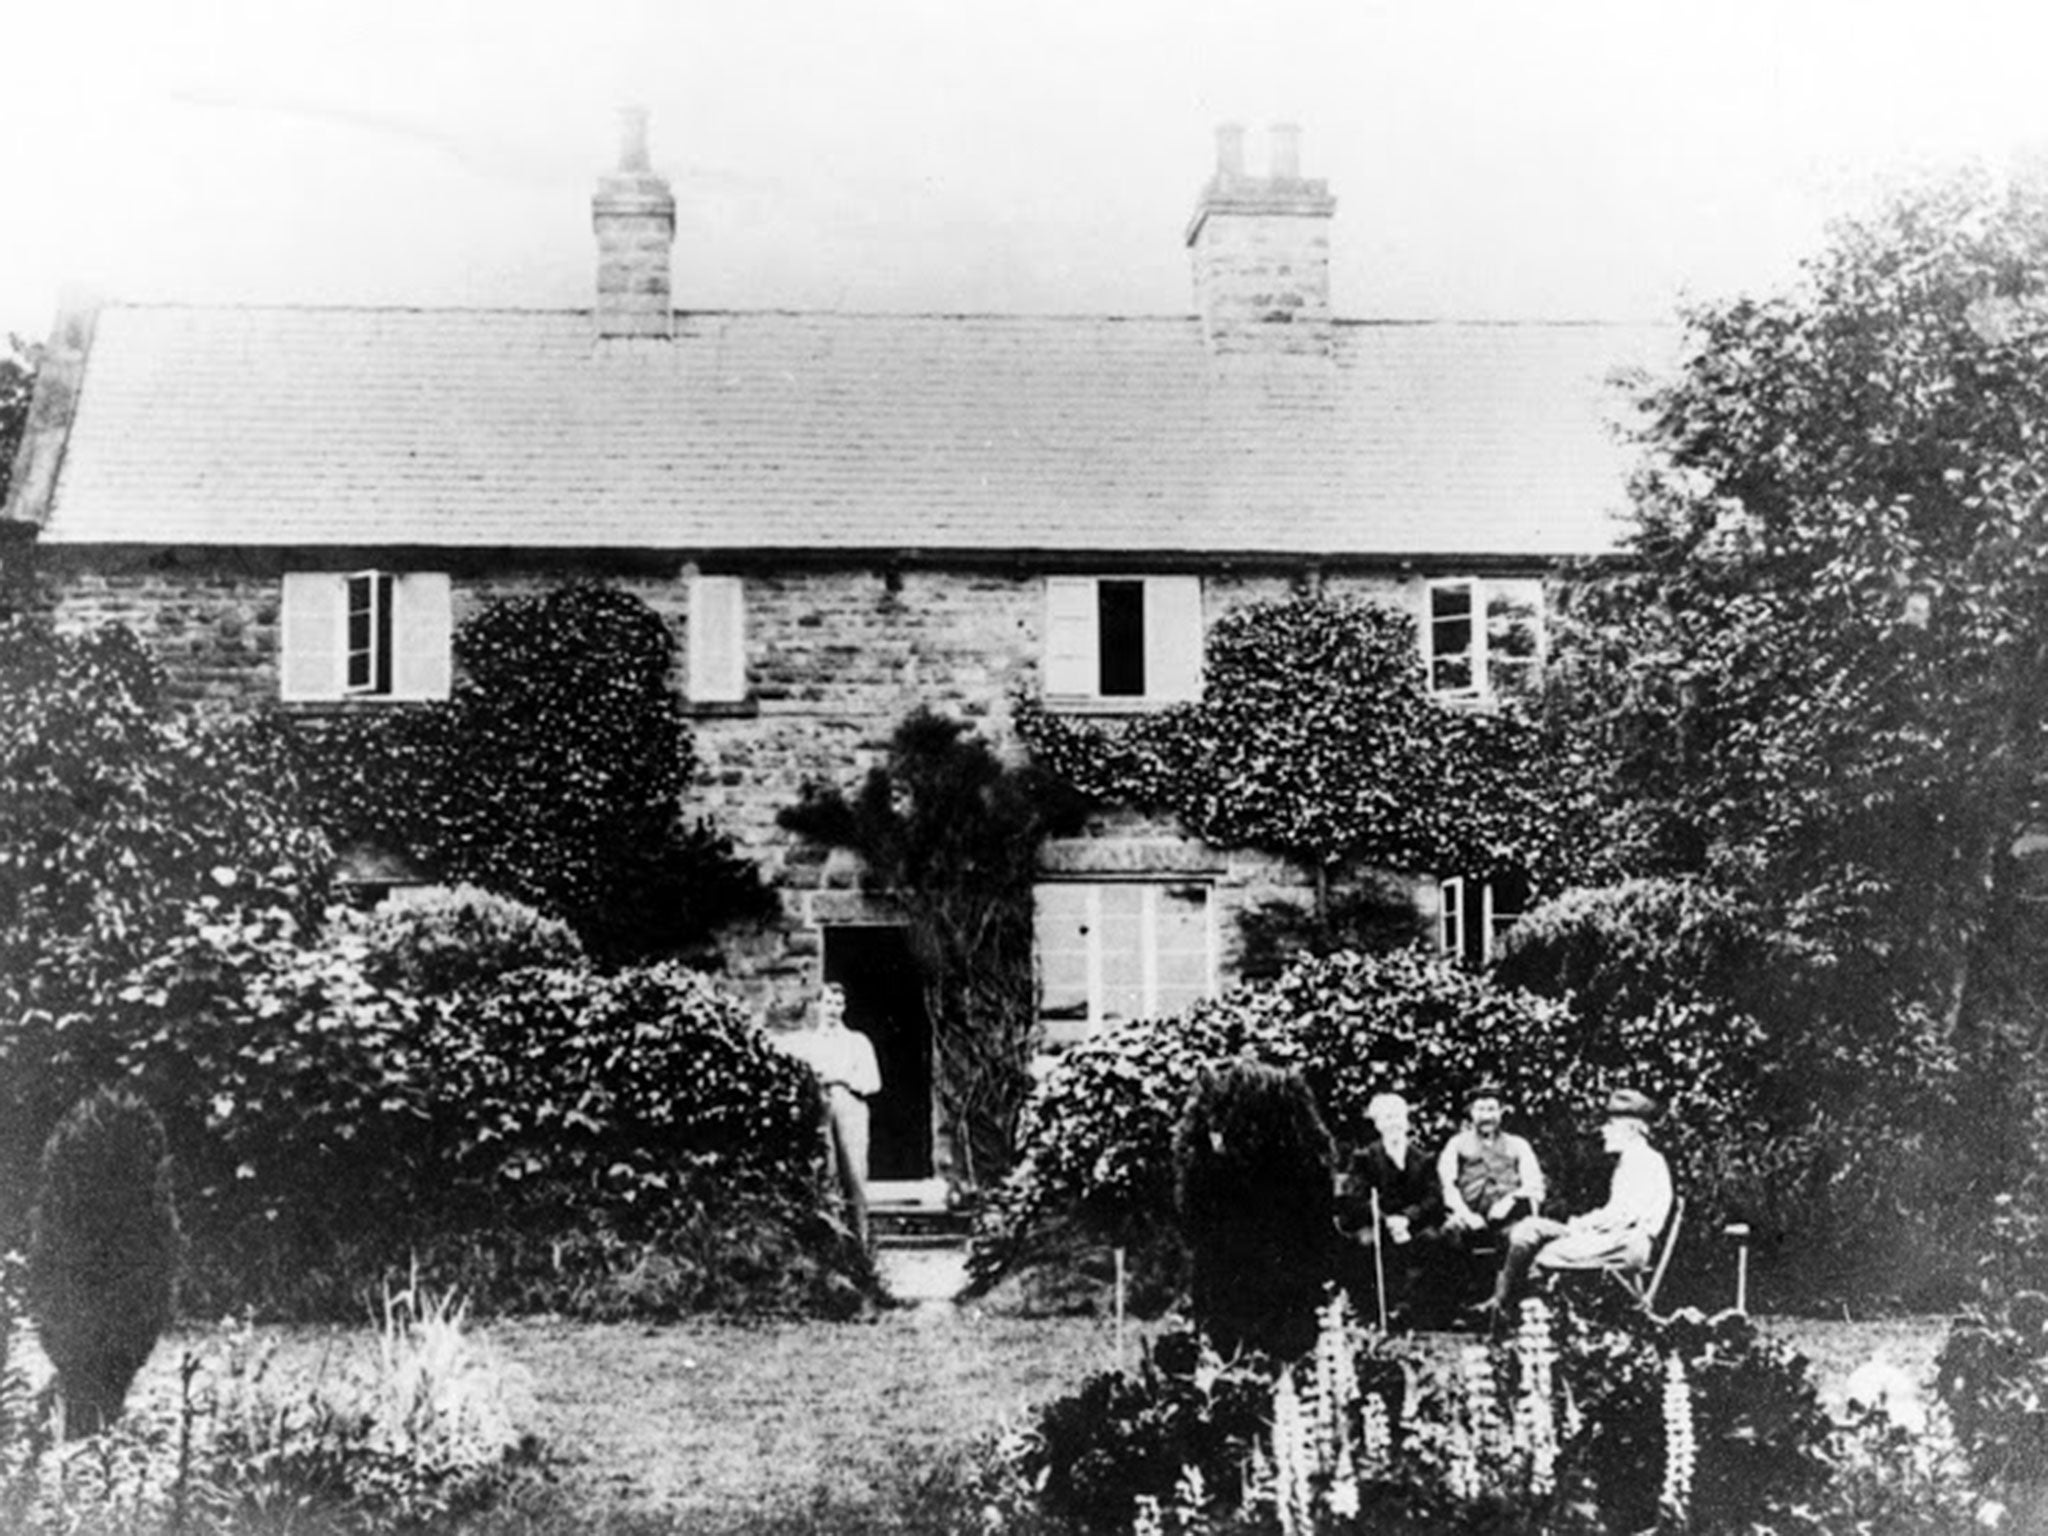 Edward Carpenter, founding father of gay rights in Britain, centre, and friends at Millthorpe in Derbyshire